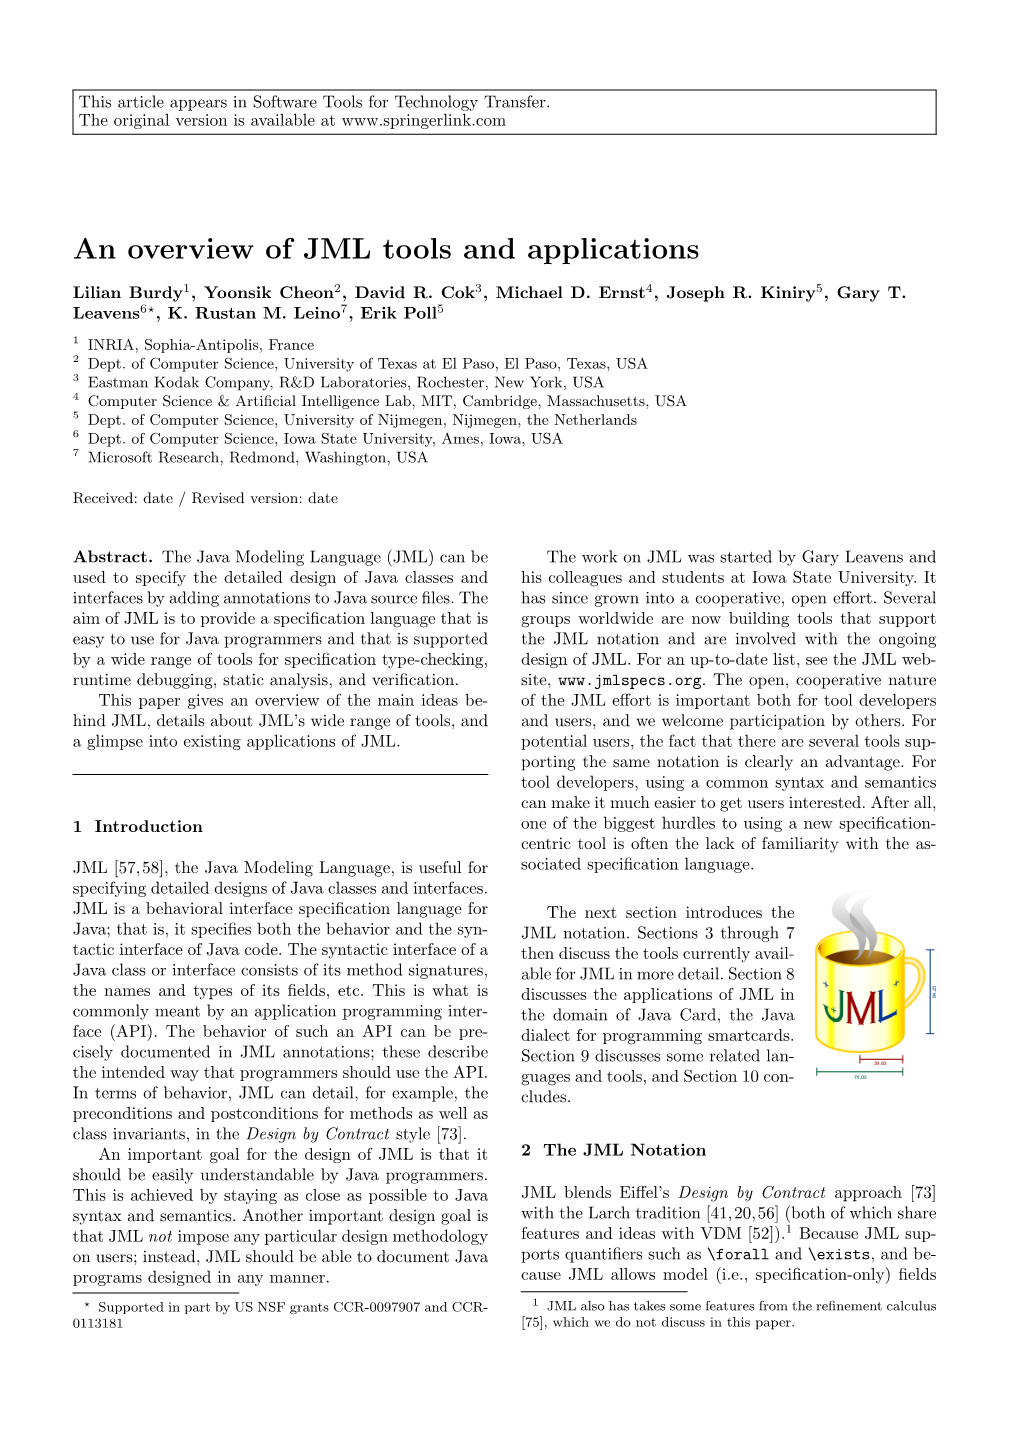 An Overview of JML Tools and Applications